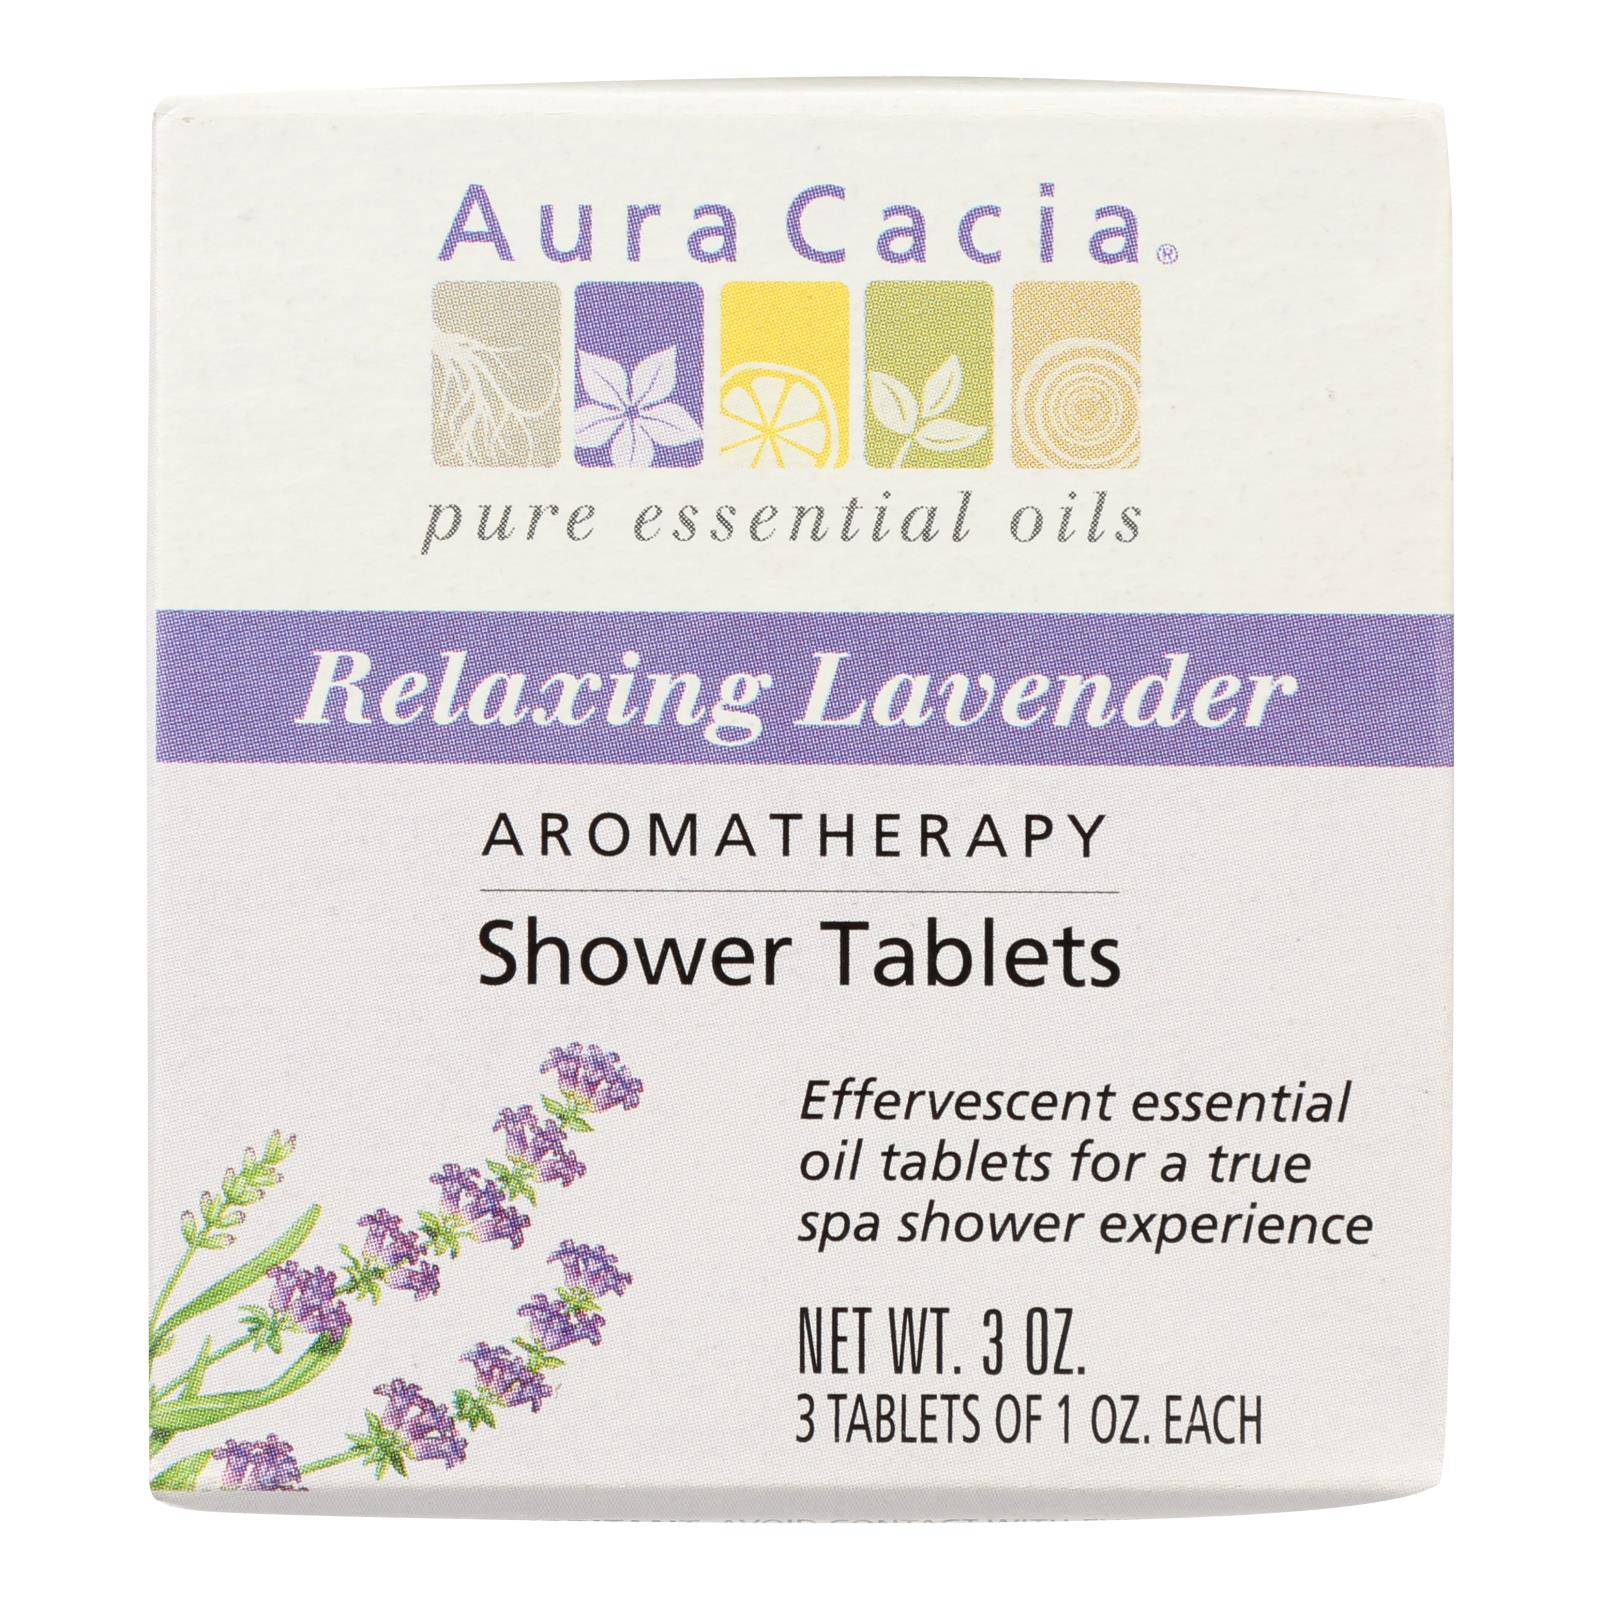 Buy Aura Cacia - Aromatherapy Shower Tablets Relaxing Lavender - 3 Tablets  at OnlyNaturals.us